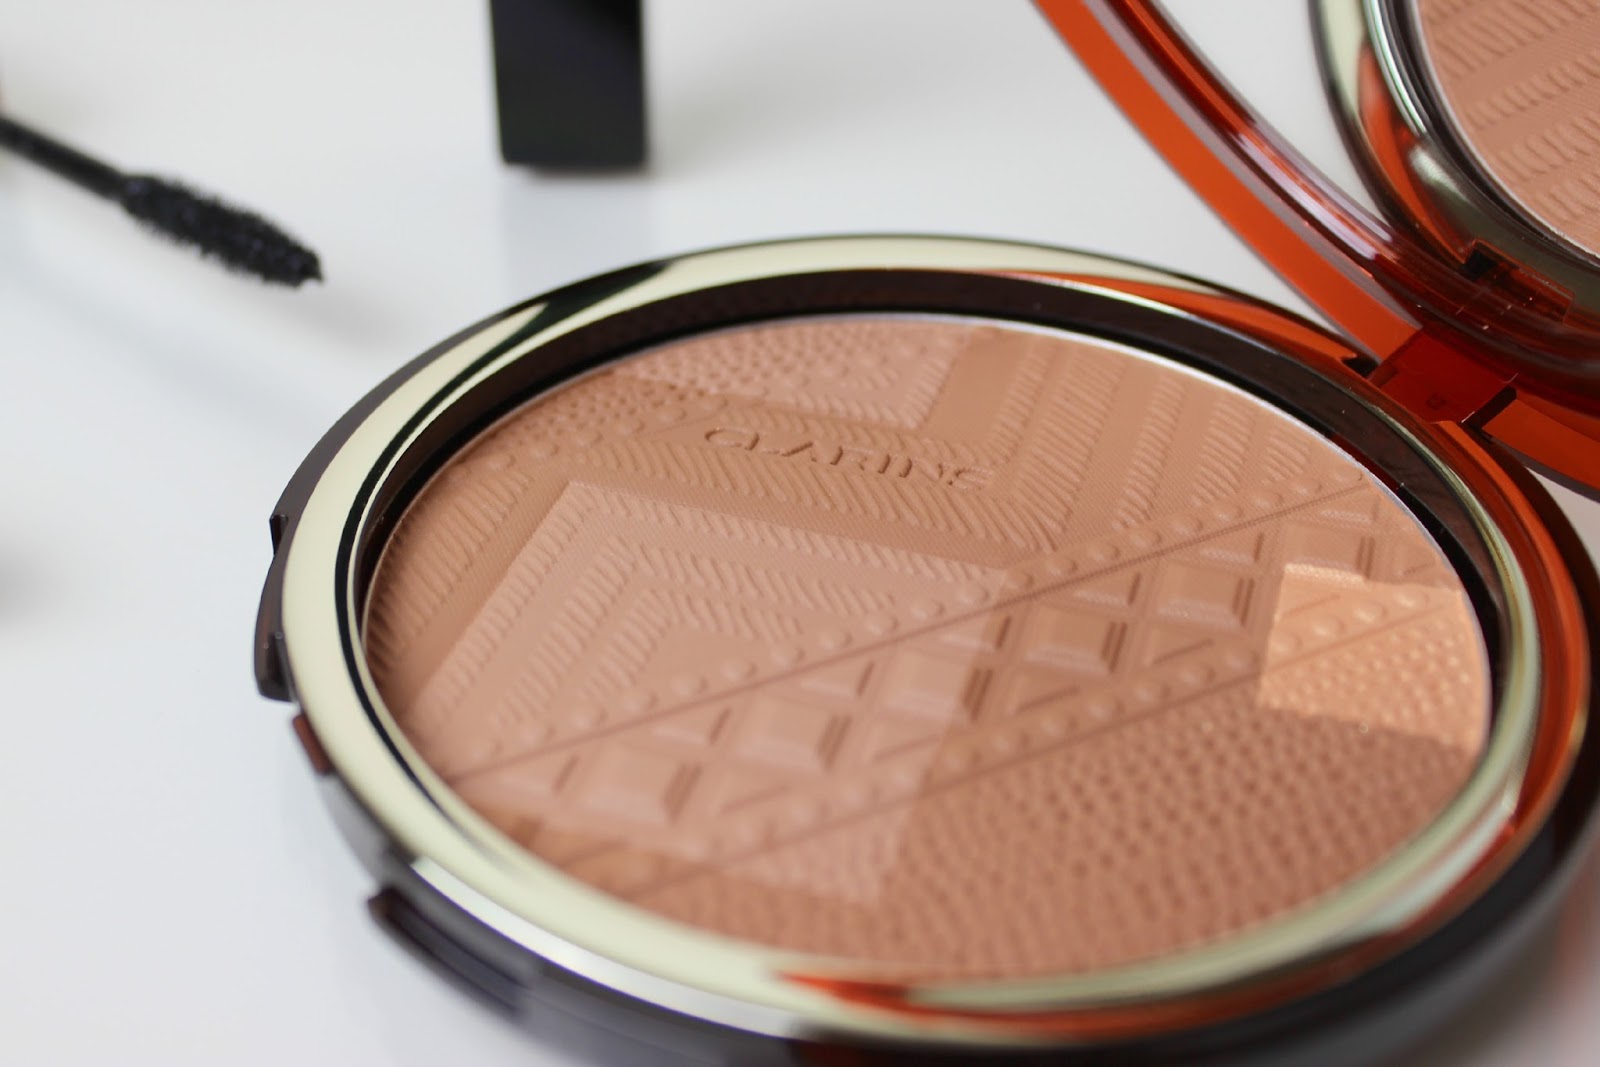 A picture of the Clarins Colours of Brazil Summer Bronzing Compact